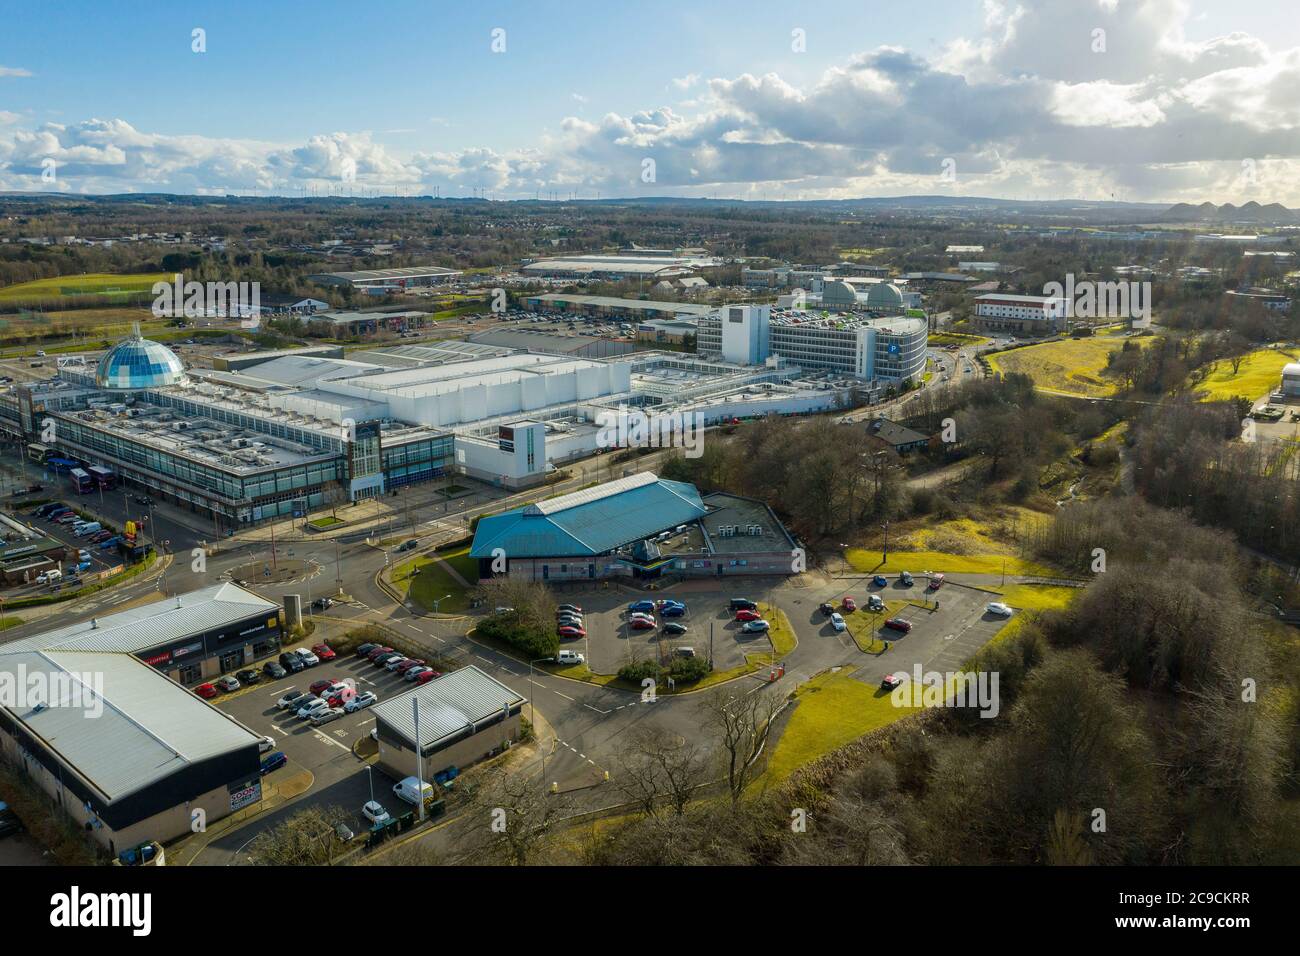 Aerial view of the Livingston shopping centre, Livingston, West lothian, Scotland. Stock Photo